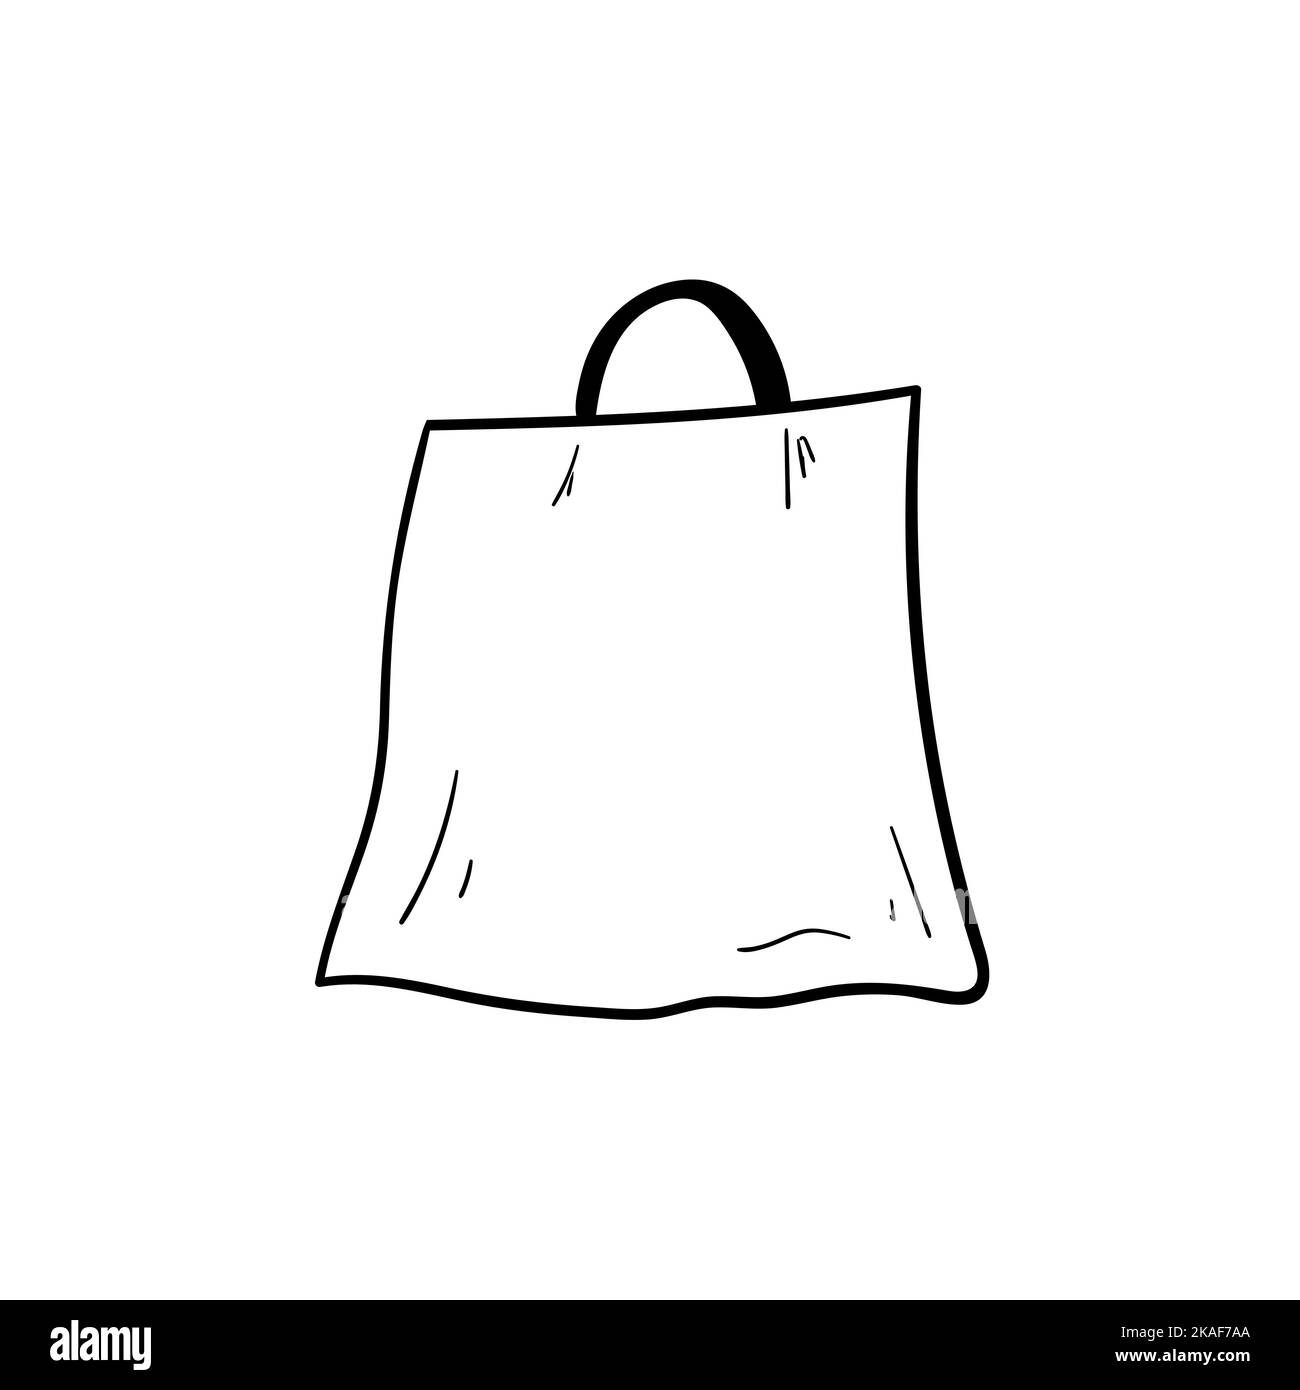 Funny shopping bag with face. Vector illustration. Coloring book page element. Stock Vector